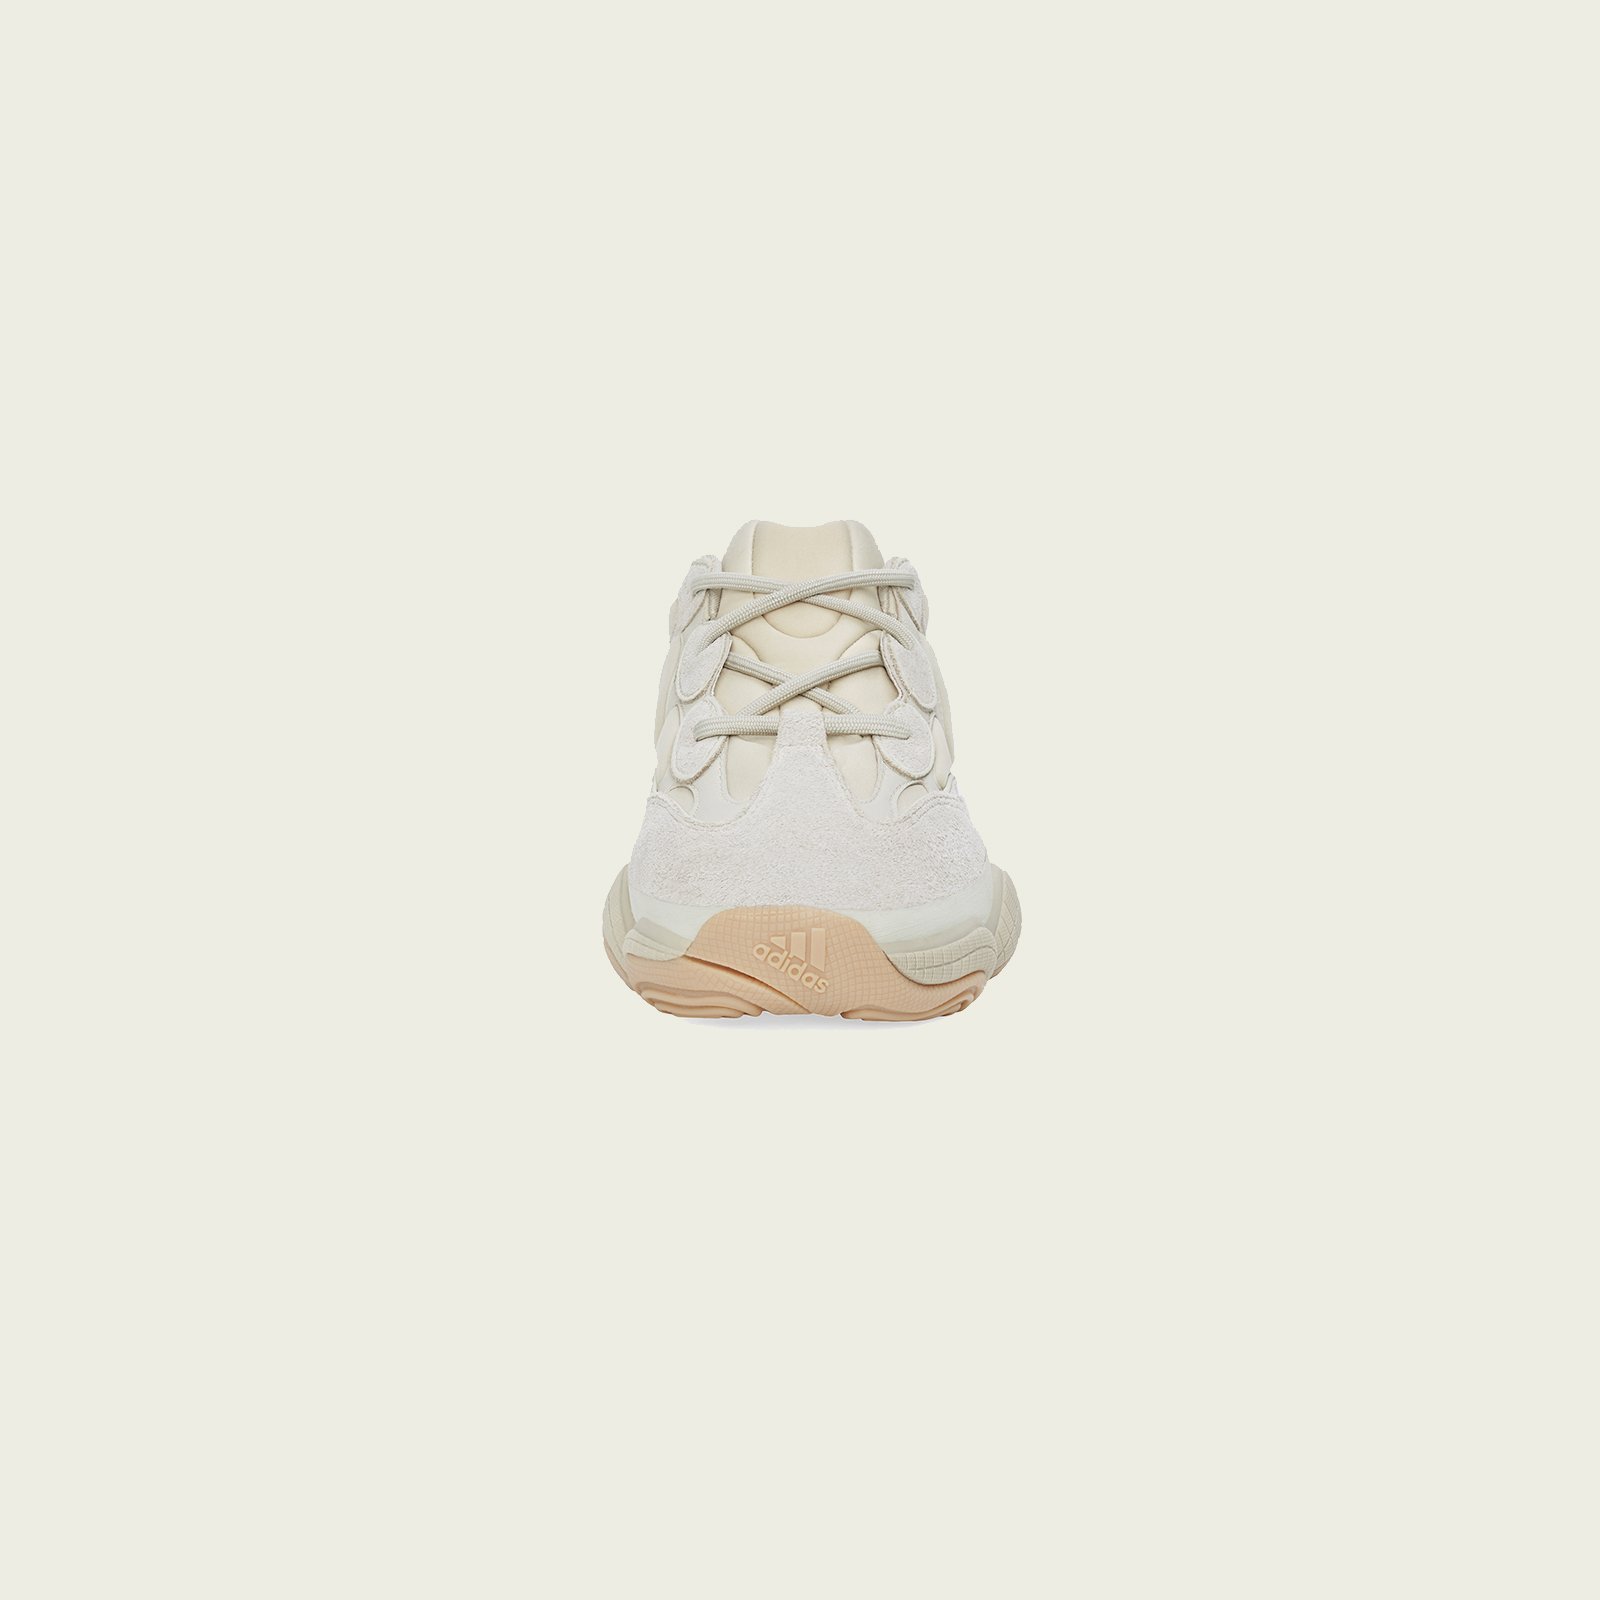 https yeezysupply com collections new arrivals footwear